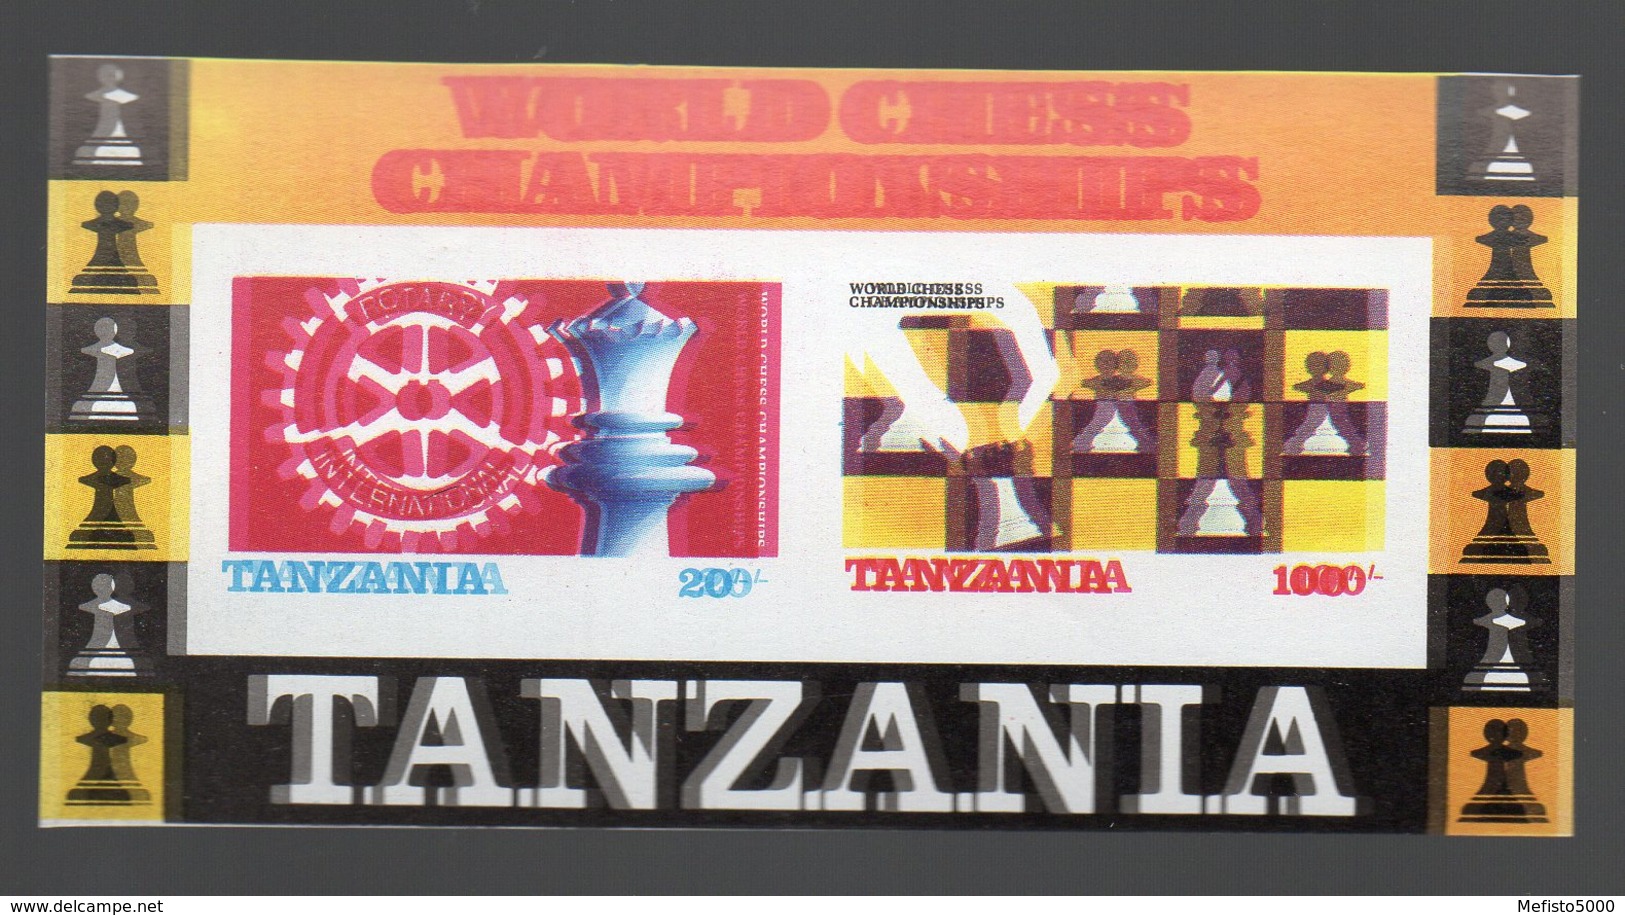 Tanzania 1986 Chess Echecs, Rotary, Imperforated SS, Double Printed. - Rotary, Lions Club